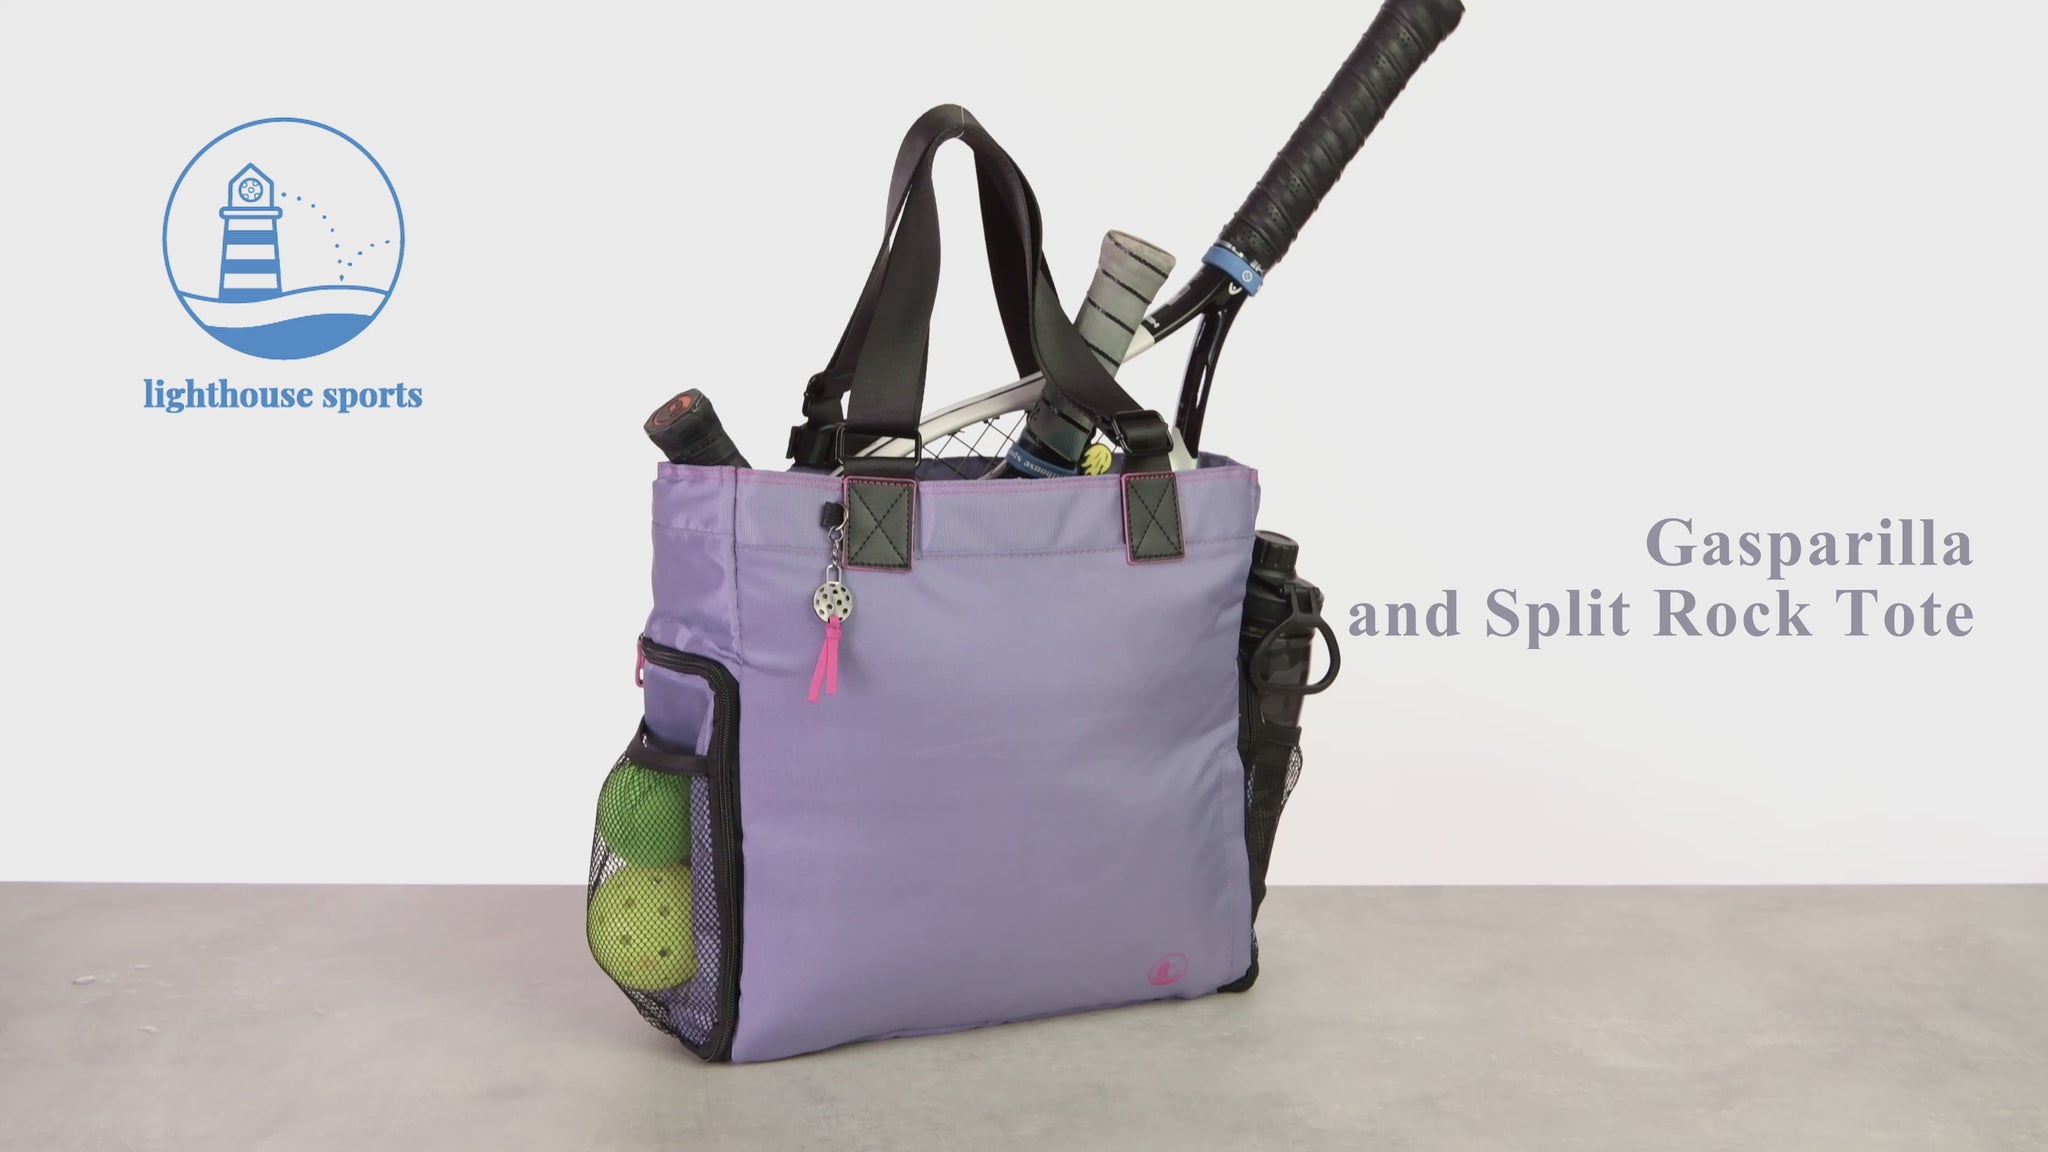 video of Gasparilla women's designer pickleball tote fully loaded with functionality